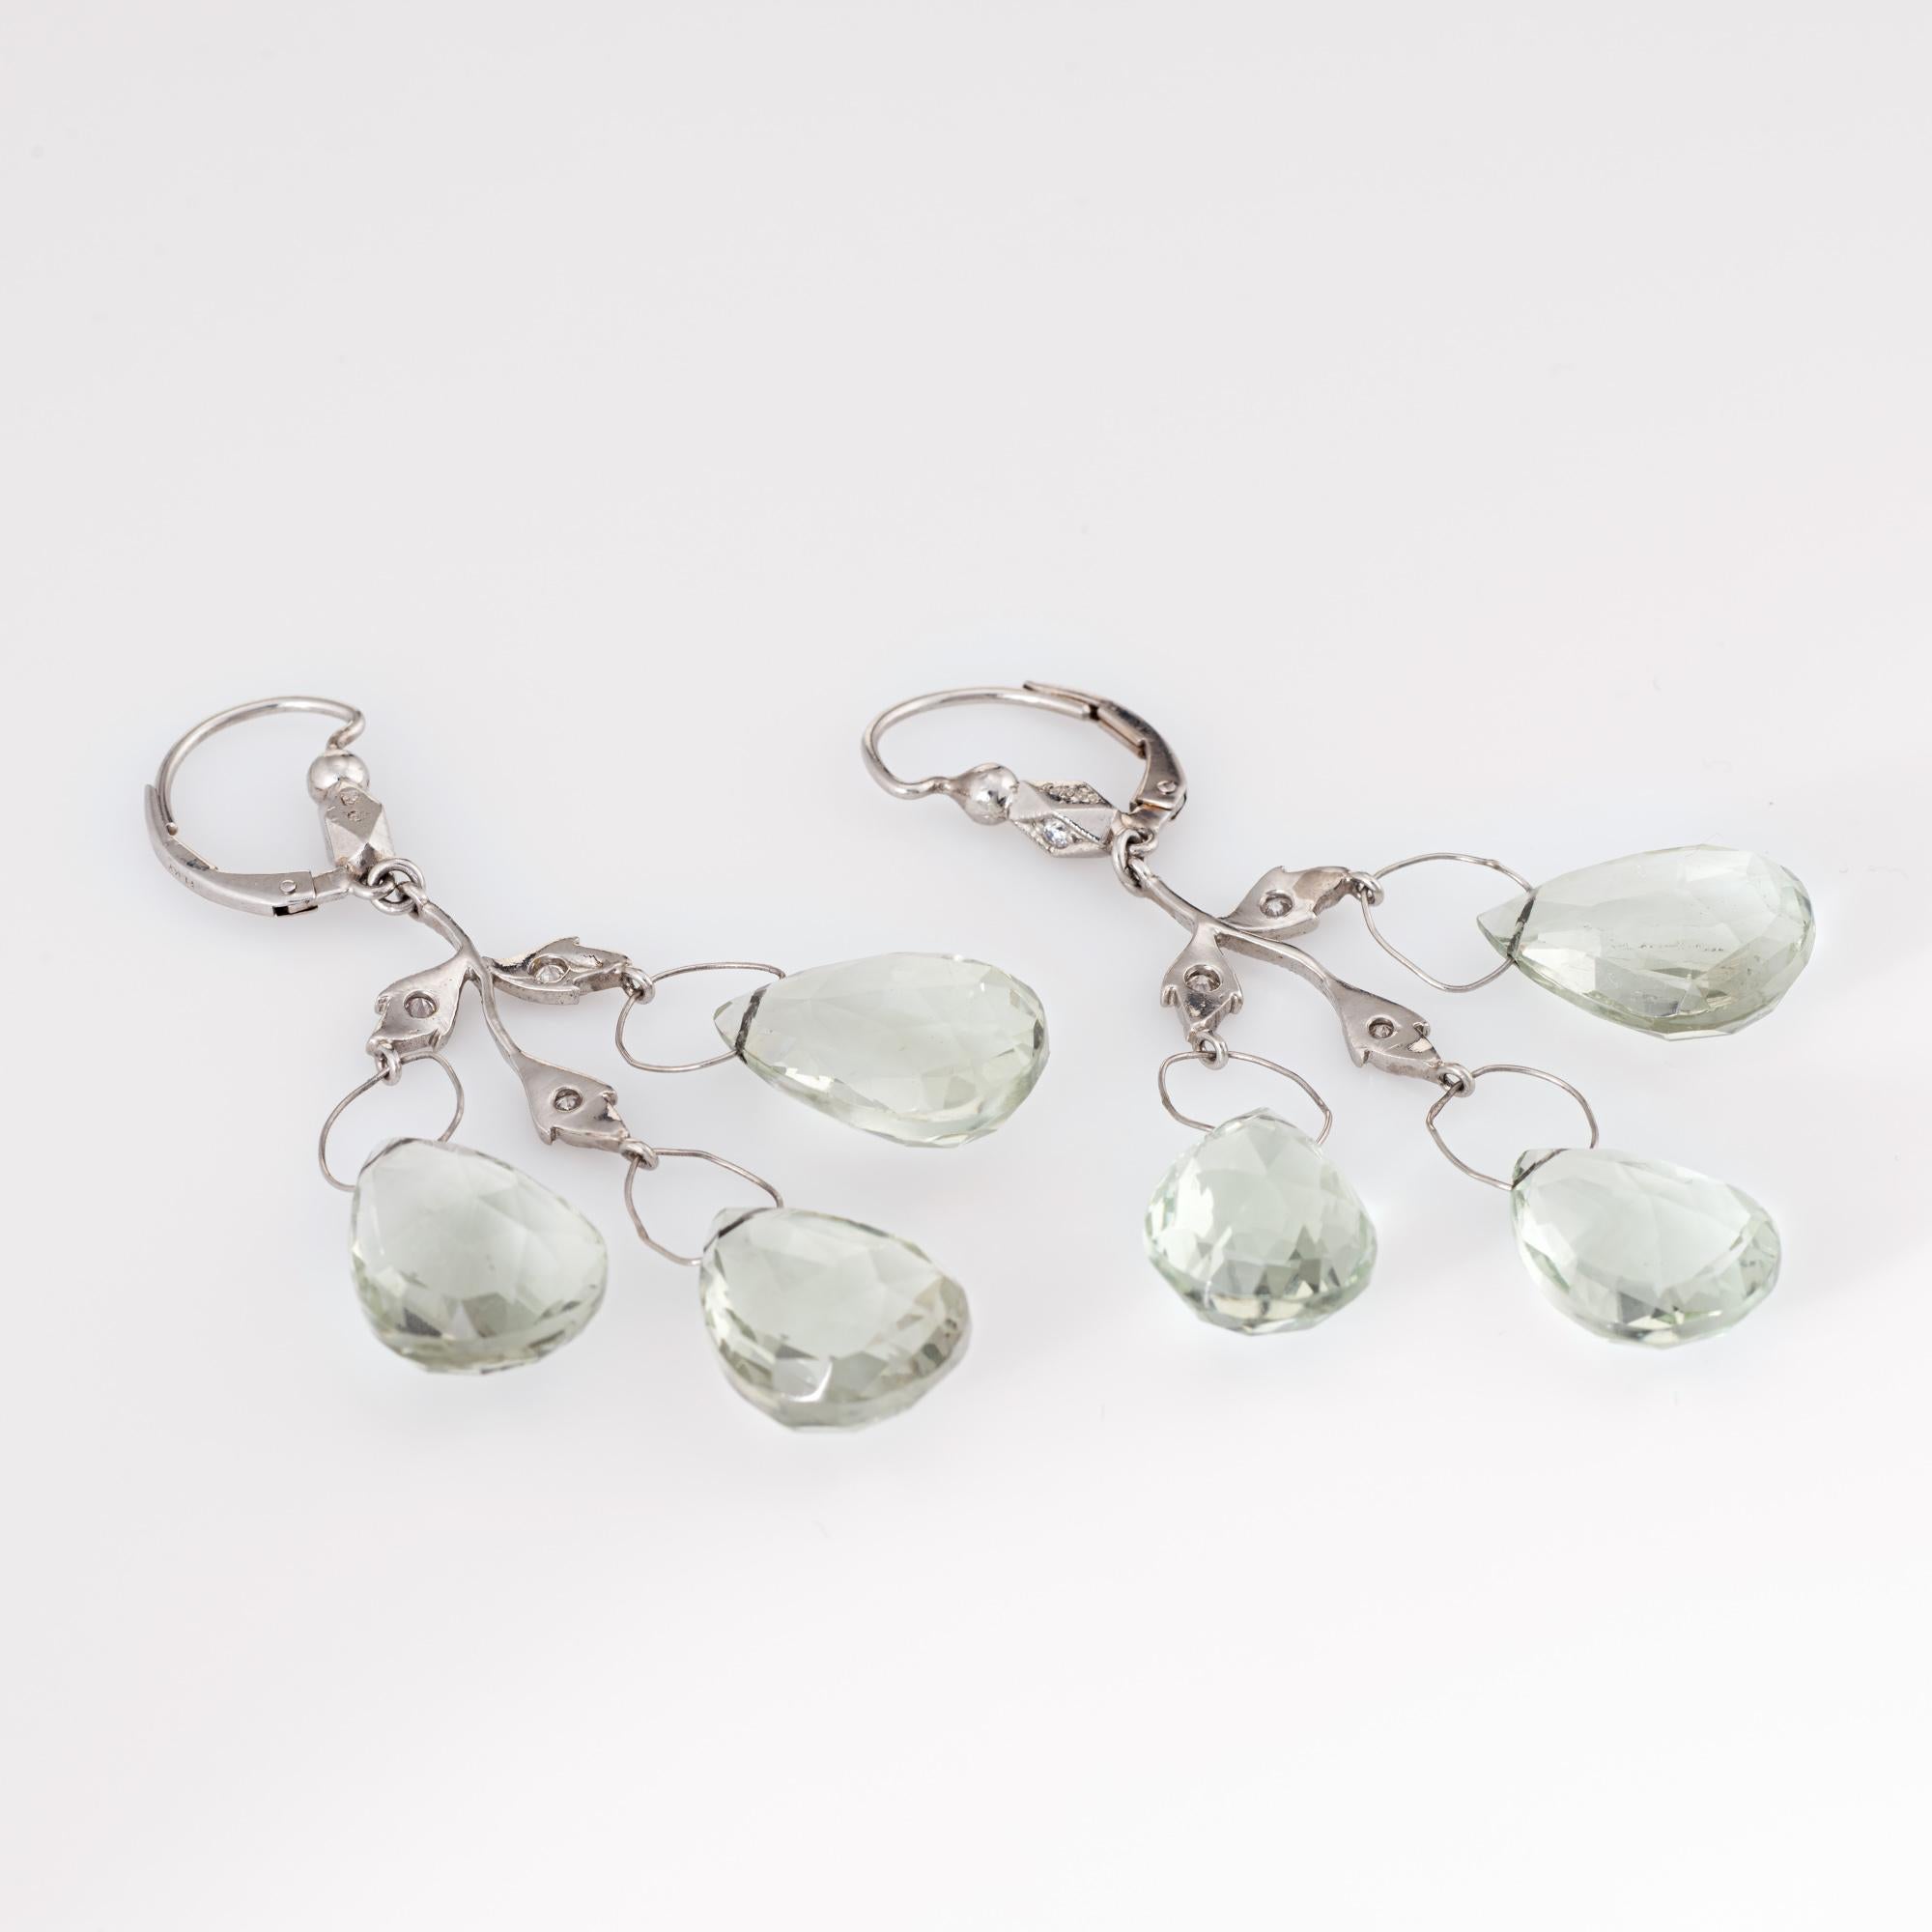 Elegant pair of Cathy Waterman leaf drop earrings crafted in 900 platinum. 

Checkerboard faceted prasiolite green amethyst measures 16mm x 11mm and total an estimated 42 carats. The eight estimated 0.01 carat round brilliant cut diamonds total an